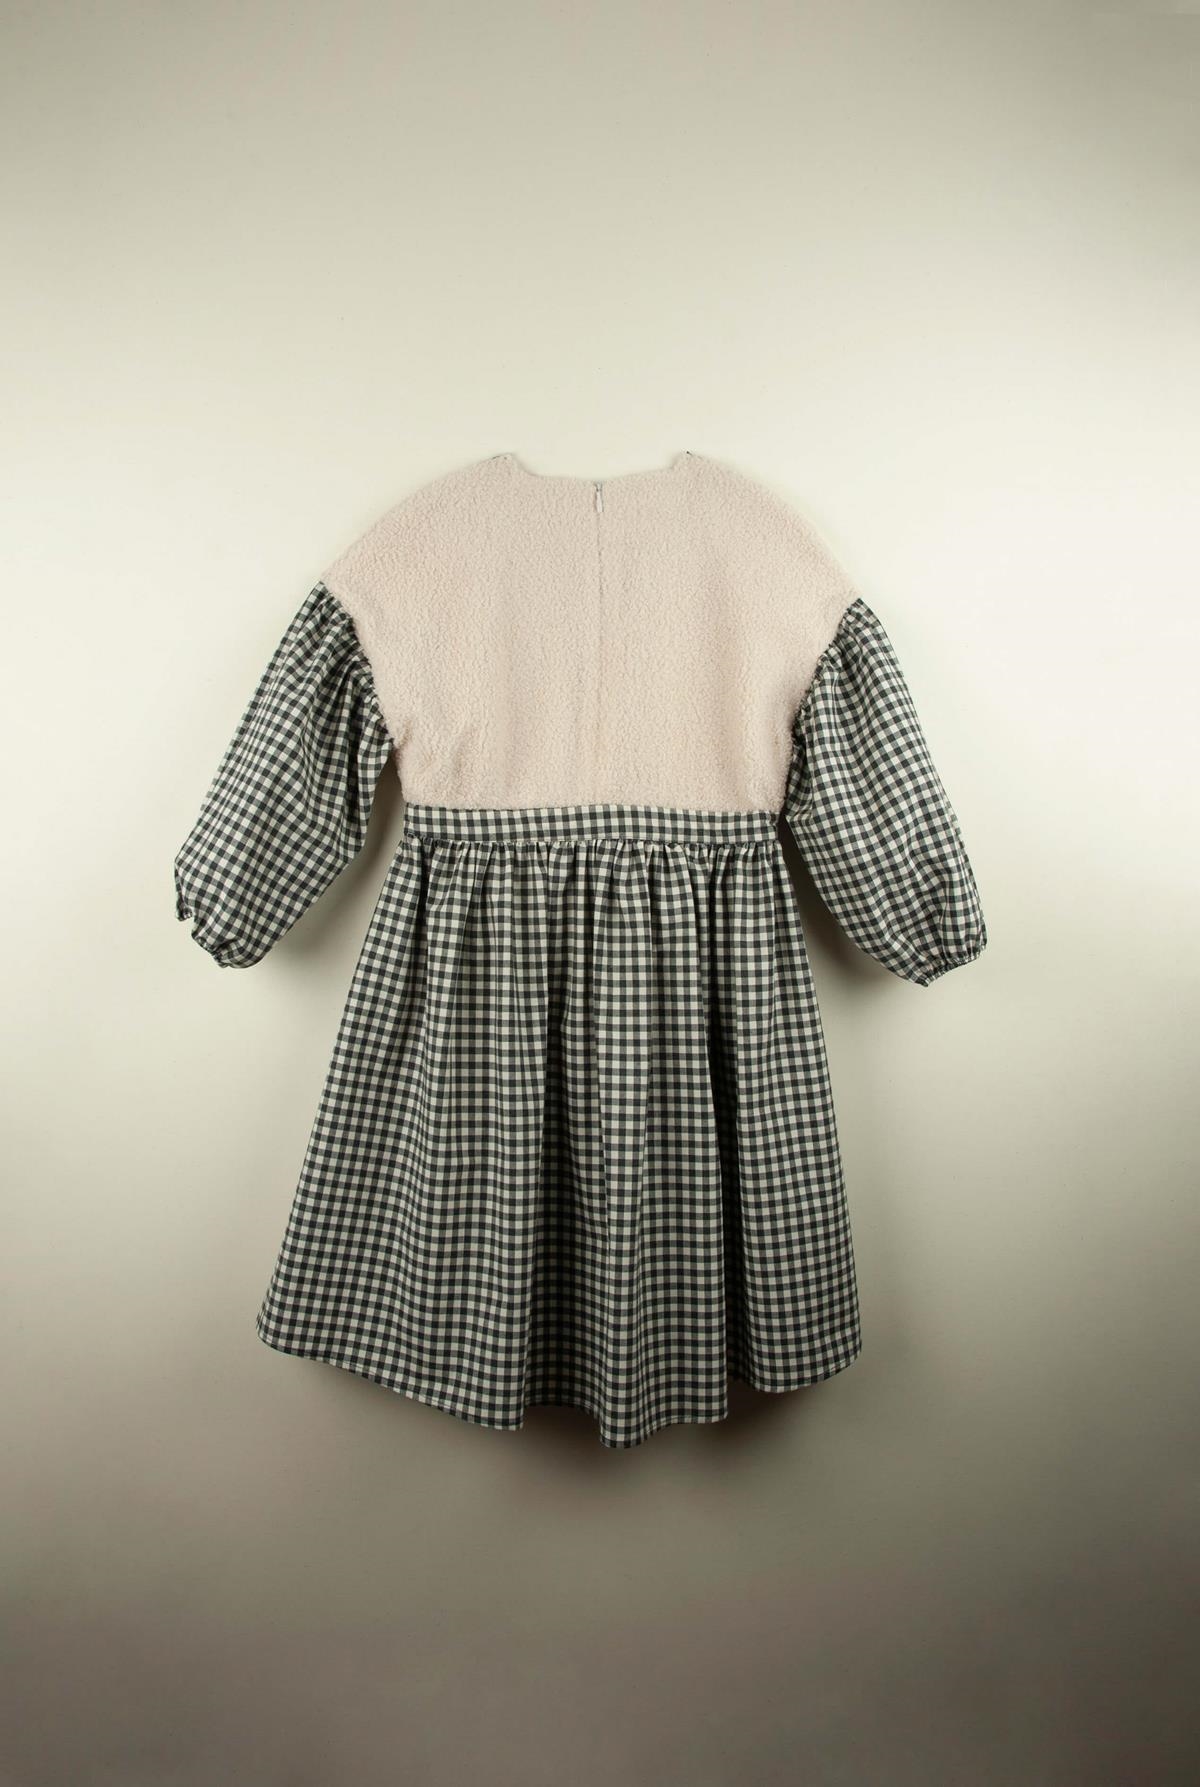 Mod.32.2 Gingham dress with embroidered sides | AW21.22 Mod.32.2 Gingham dress with embroidered sides | 1